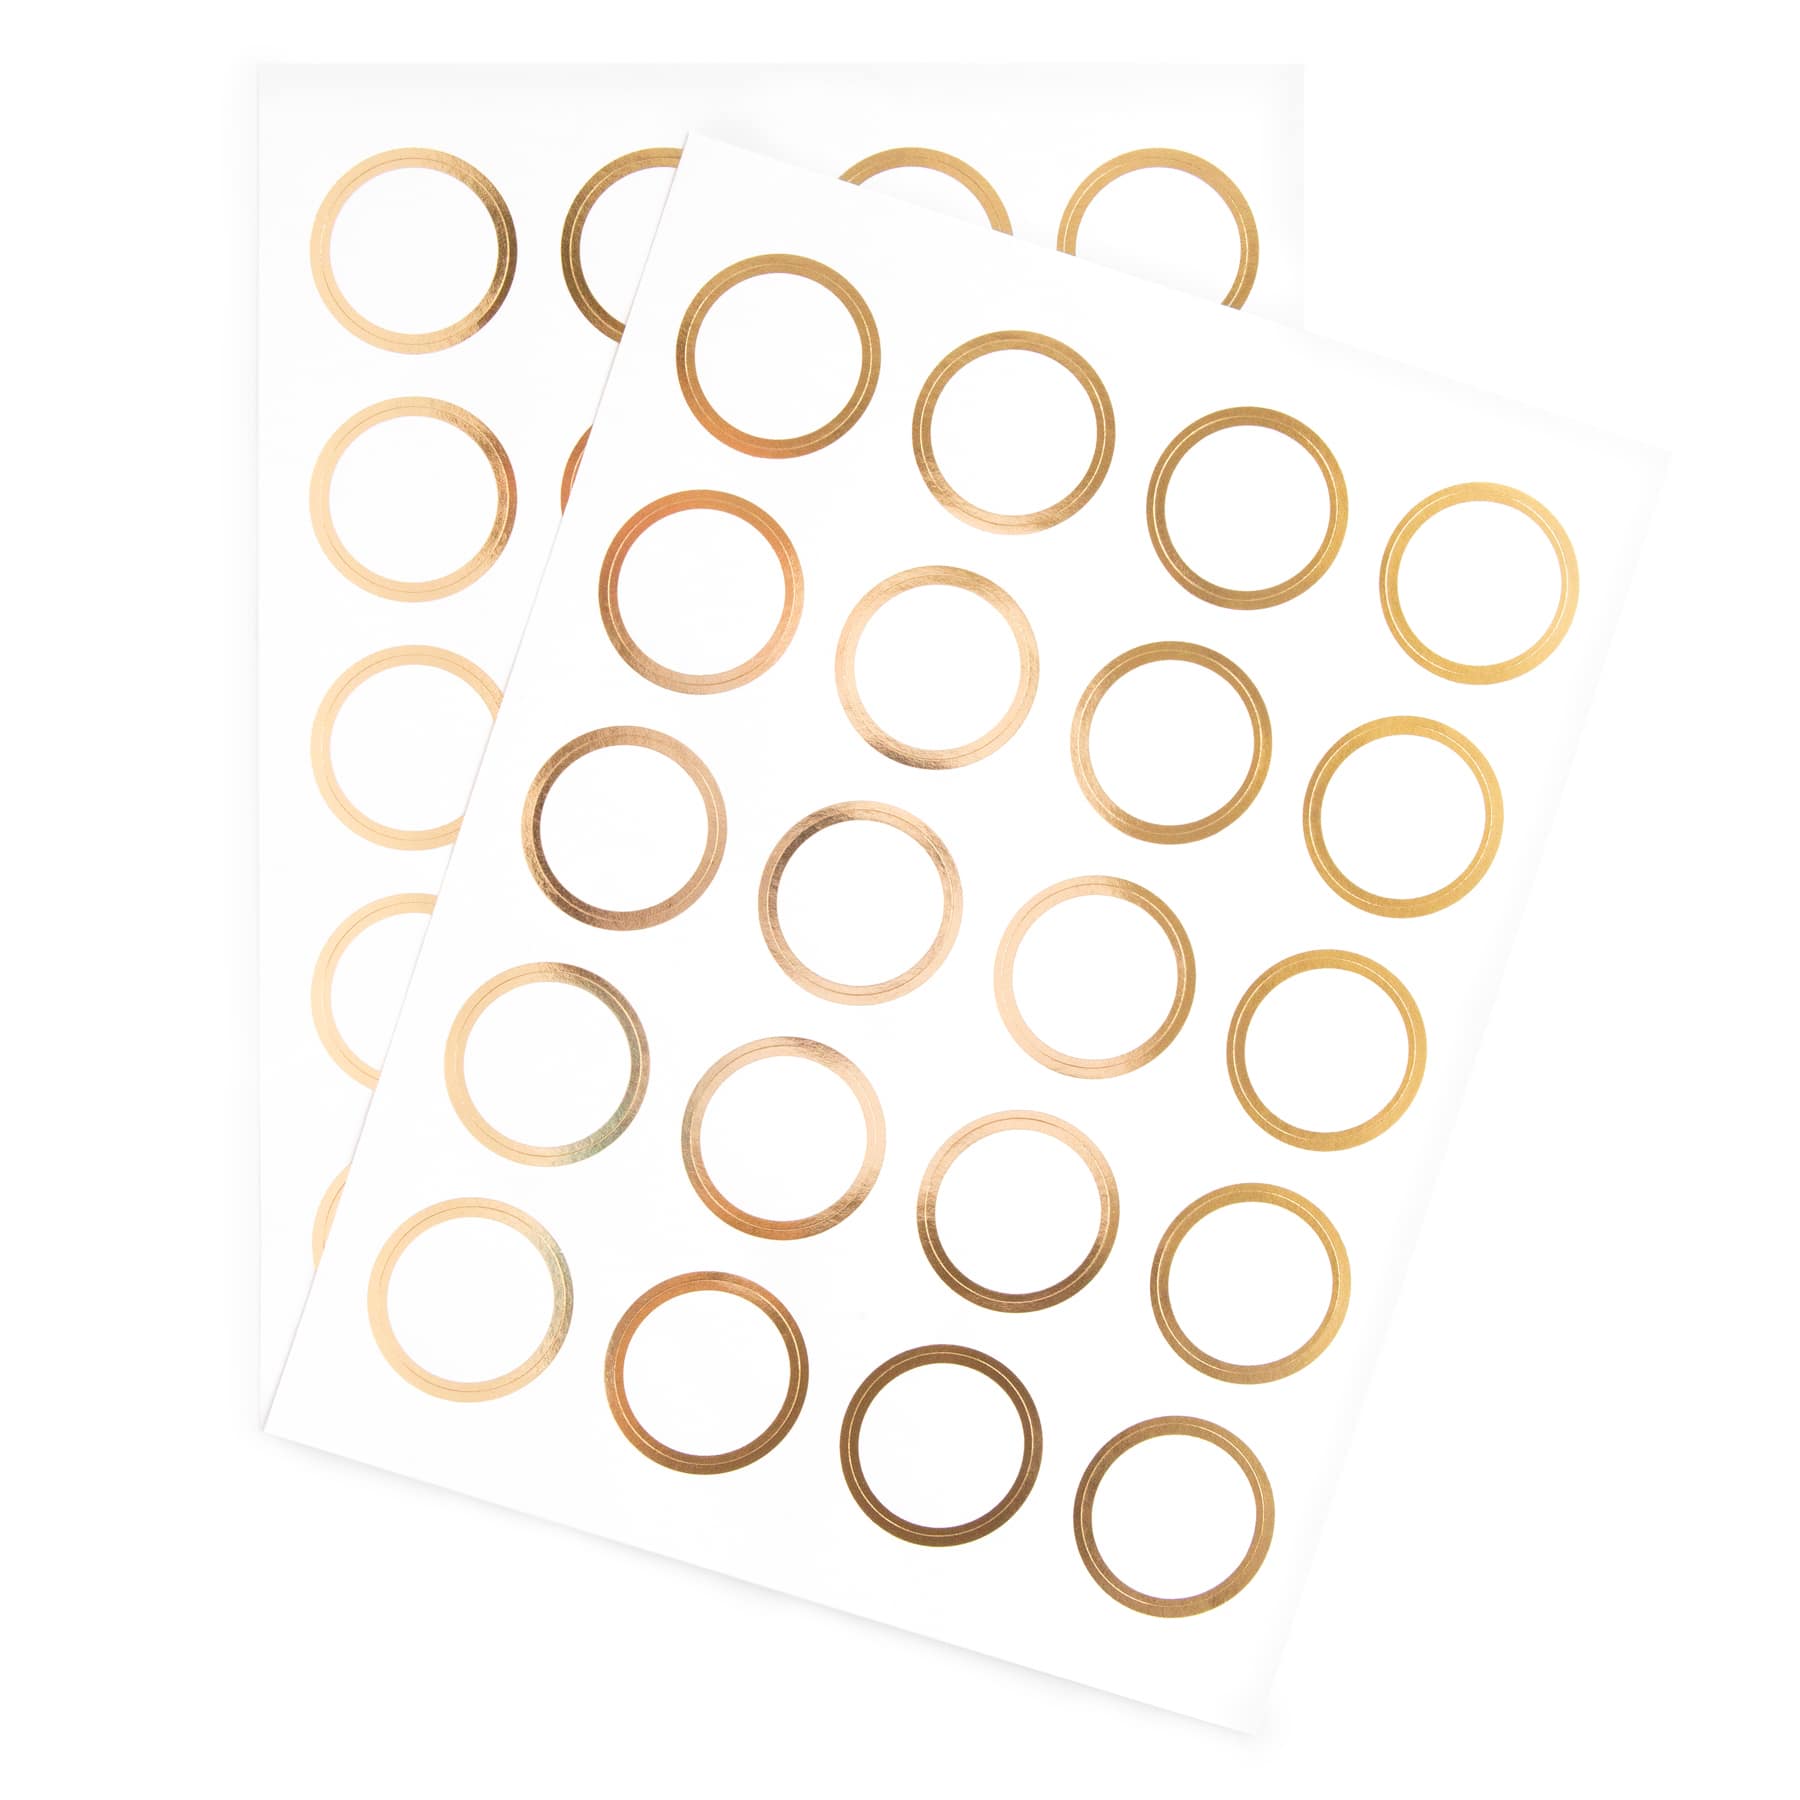 Gold Envelope Seals Stickers, 2 Round Labels Gold Foil Stickers Gold  Metallic Seals for Package, Wedding Envelope, Graduation, Certificate Wafer